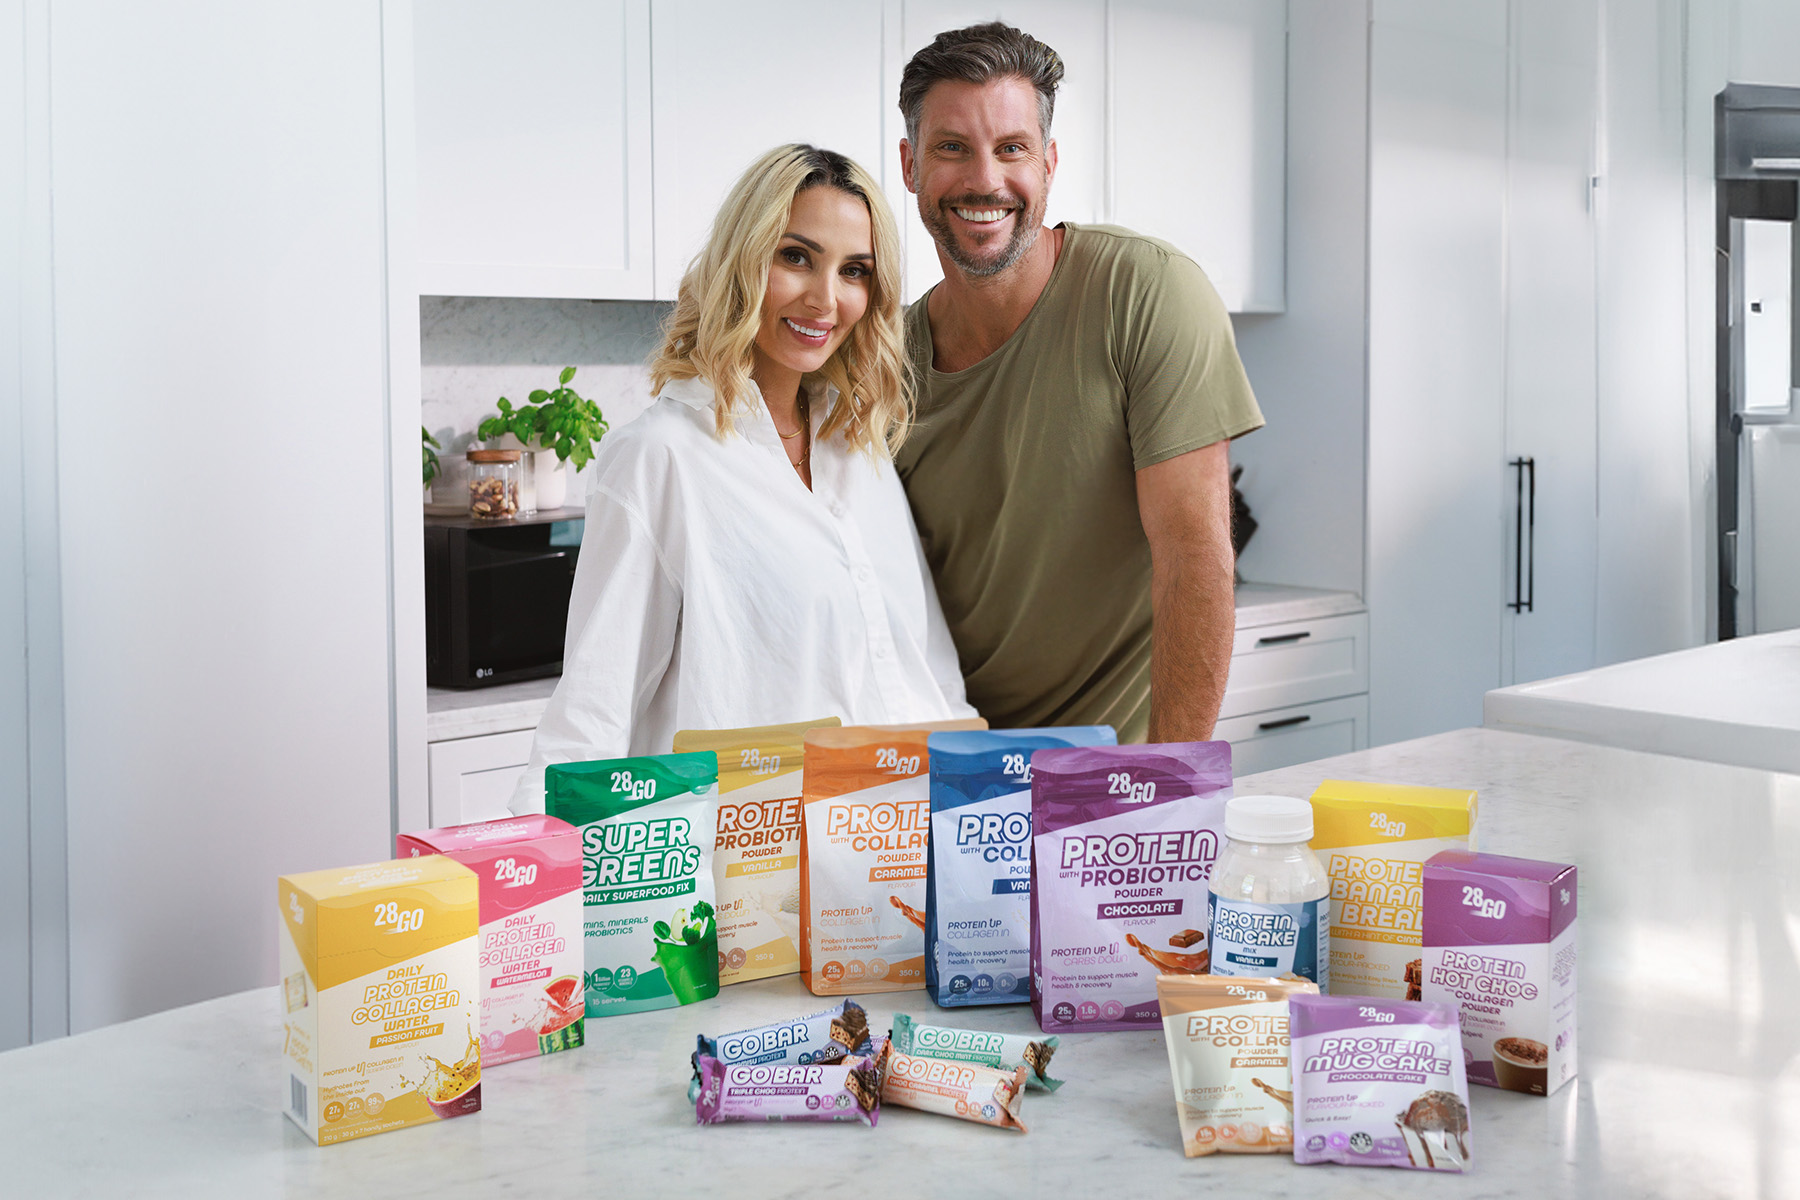 Health and Fitness Expert, Sam Wood, Launches 28GO Range, Powered by Protein